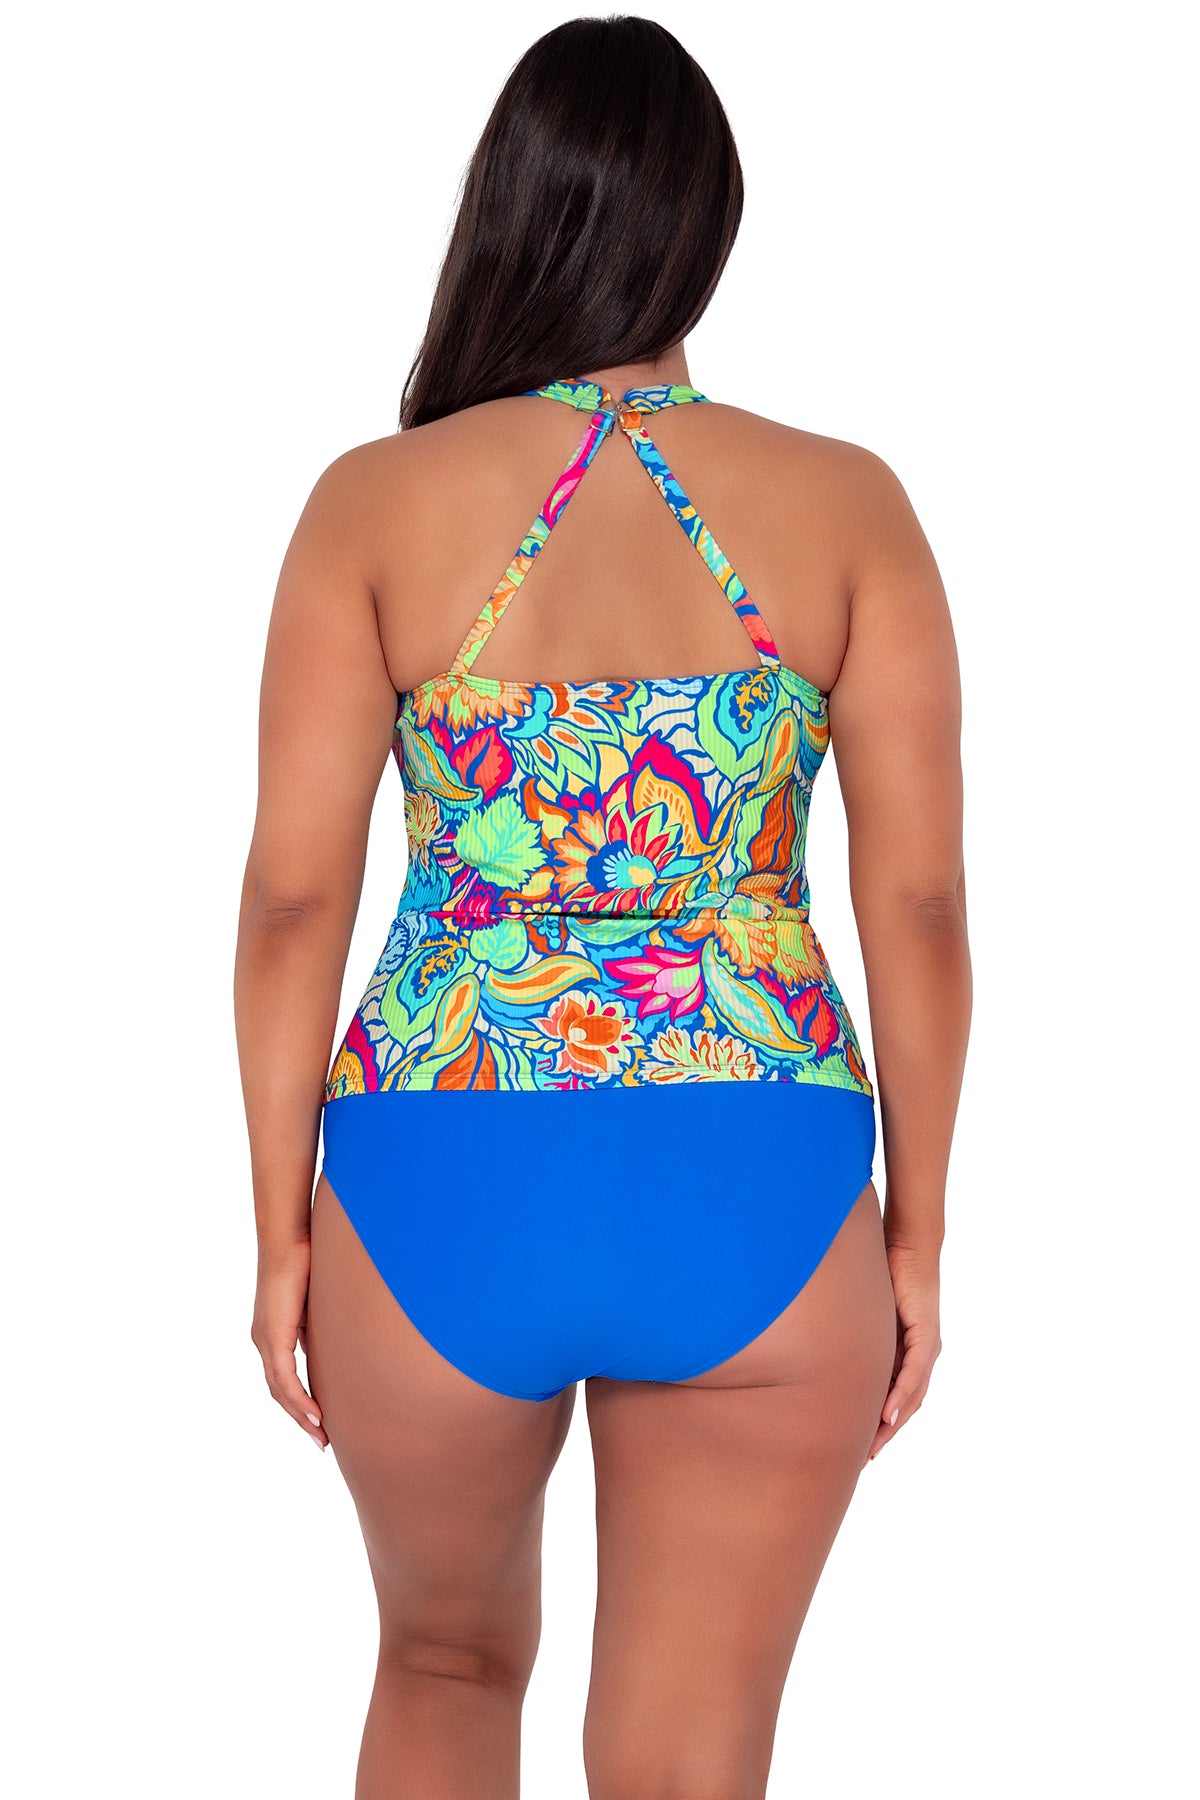 pose #1 of Nicki wearing Sunsets Escape Fiji Sandbar Rib Emerson Tankini Top showing crossback straps paired with Hannah High Waist in Electric Blue